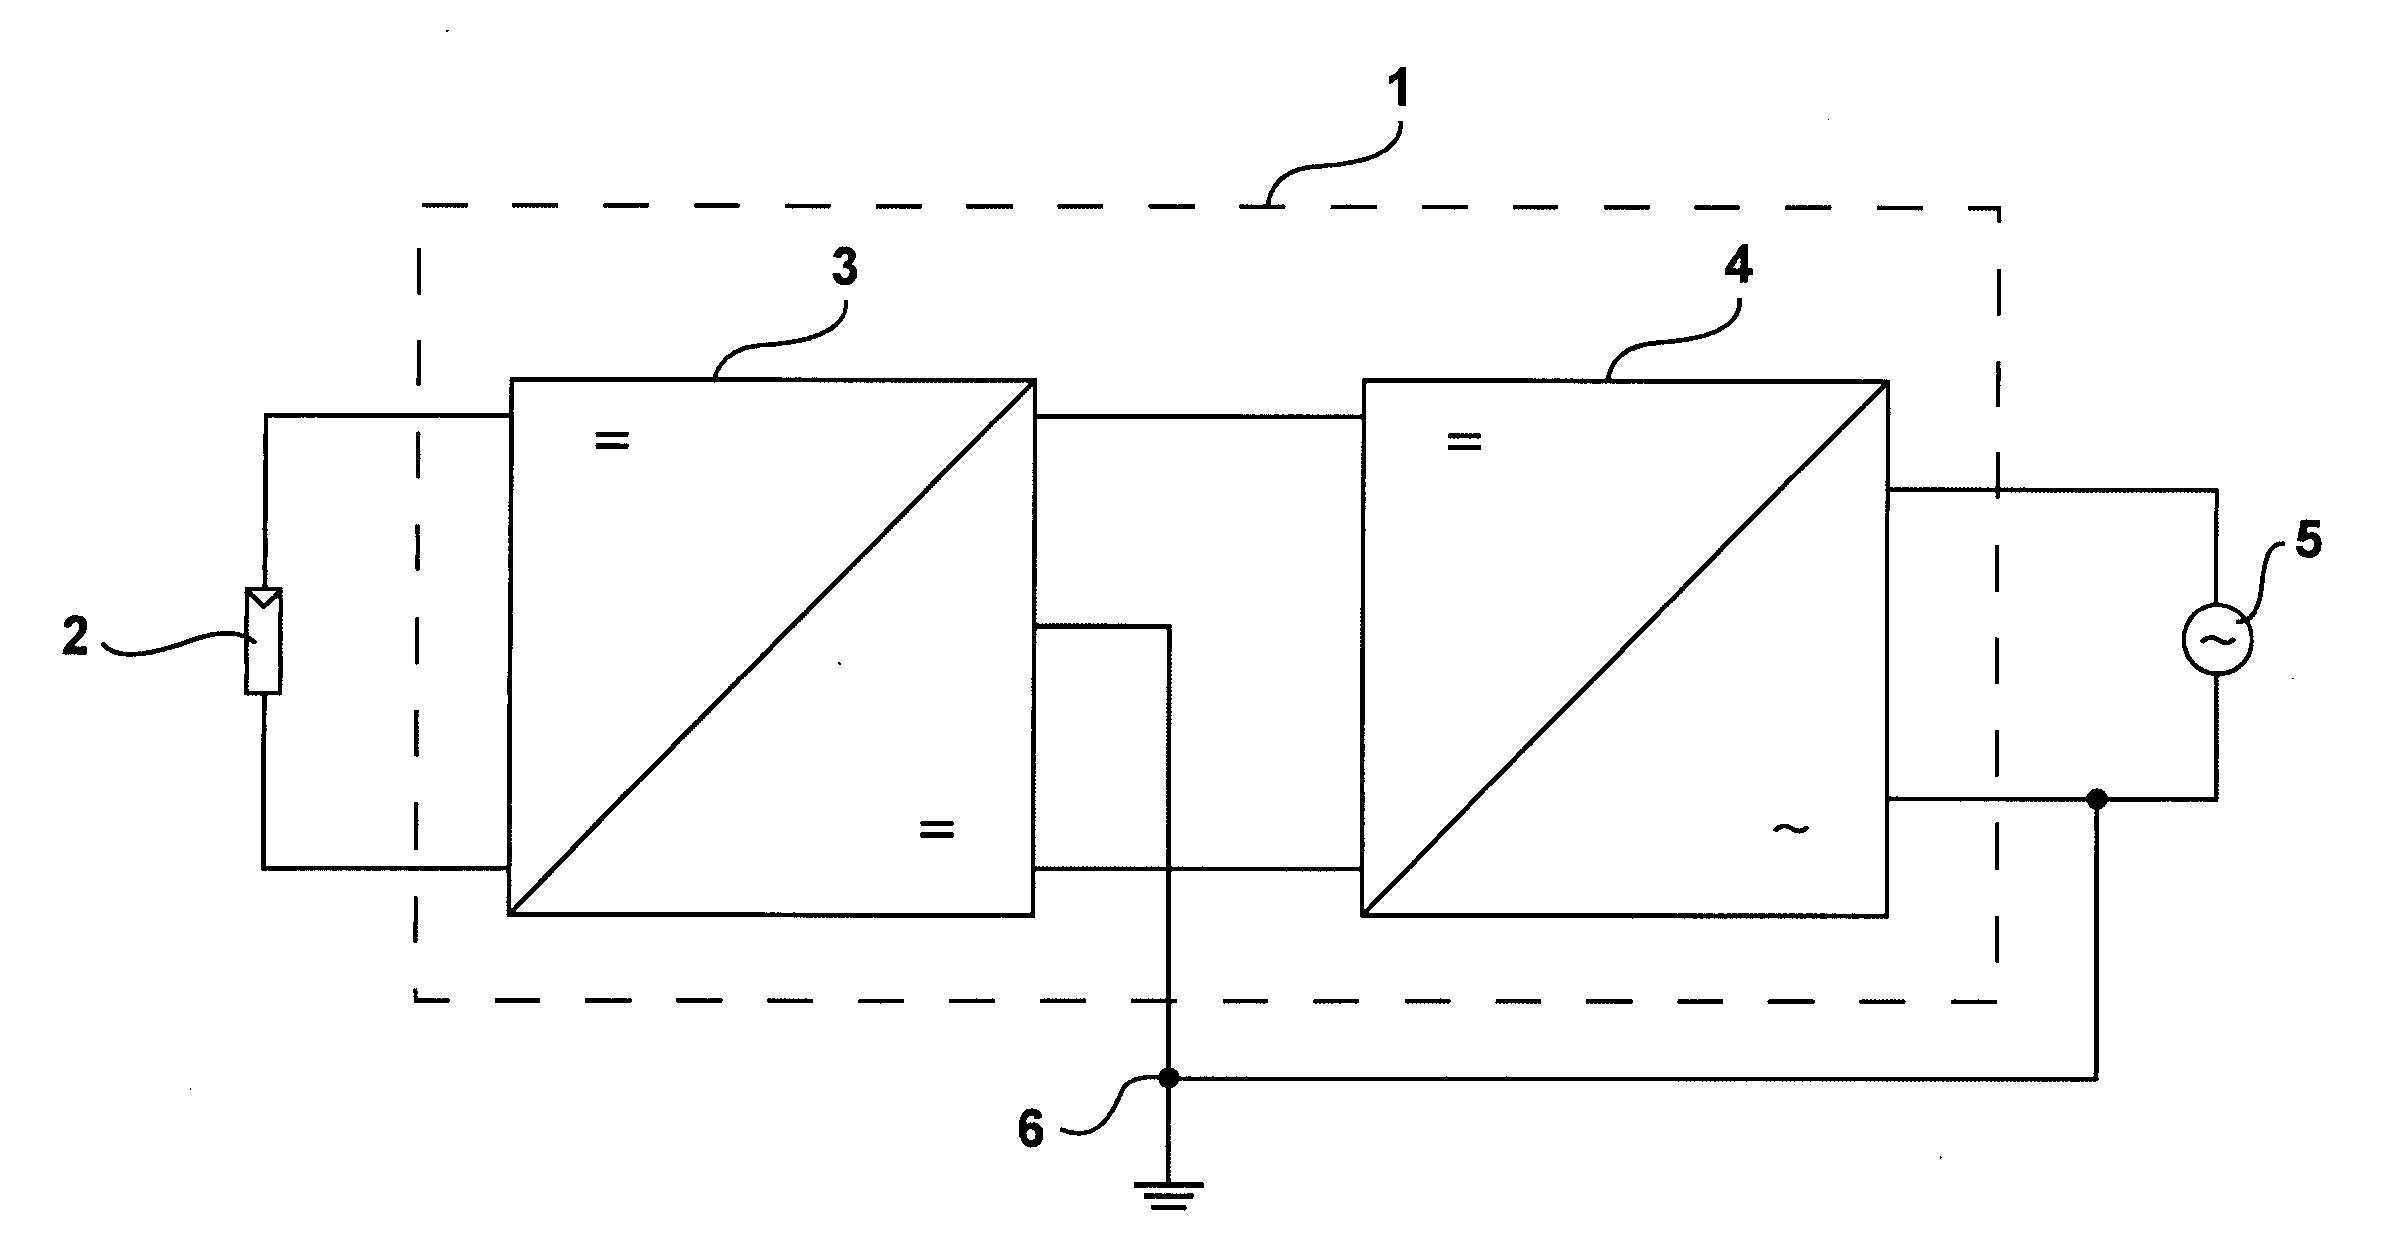 Inverter for grounded direct current source, more specifically for a photovoltaic generator